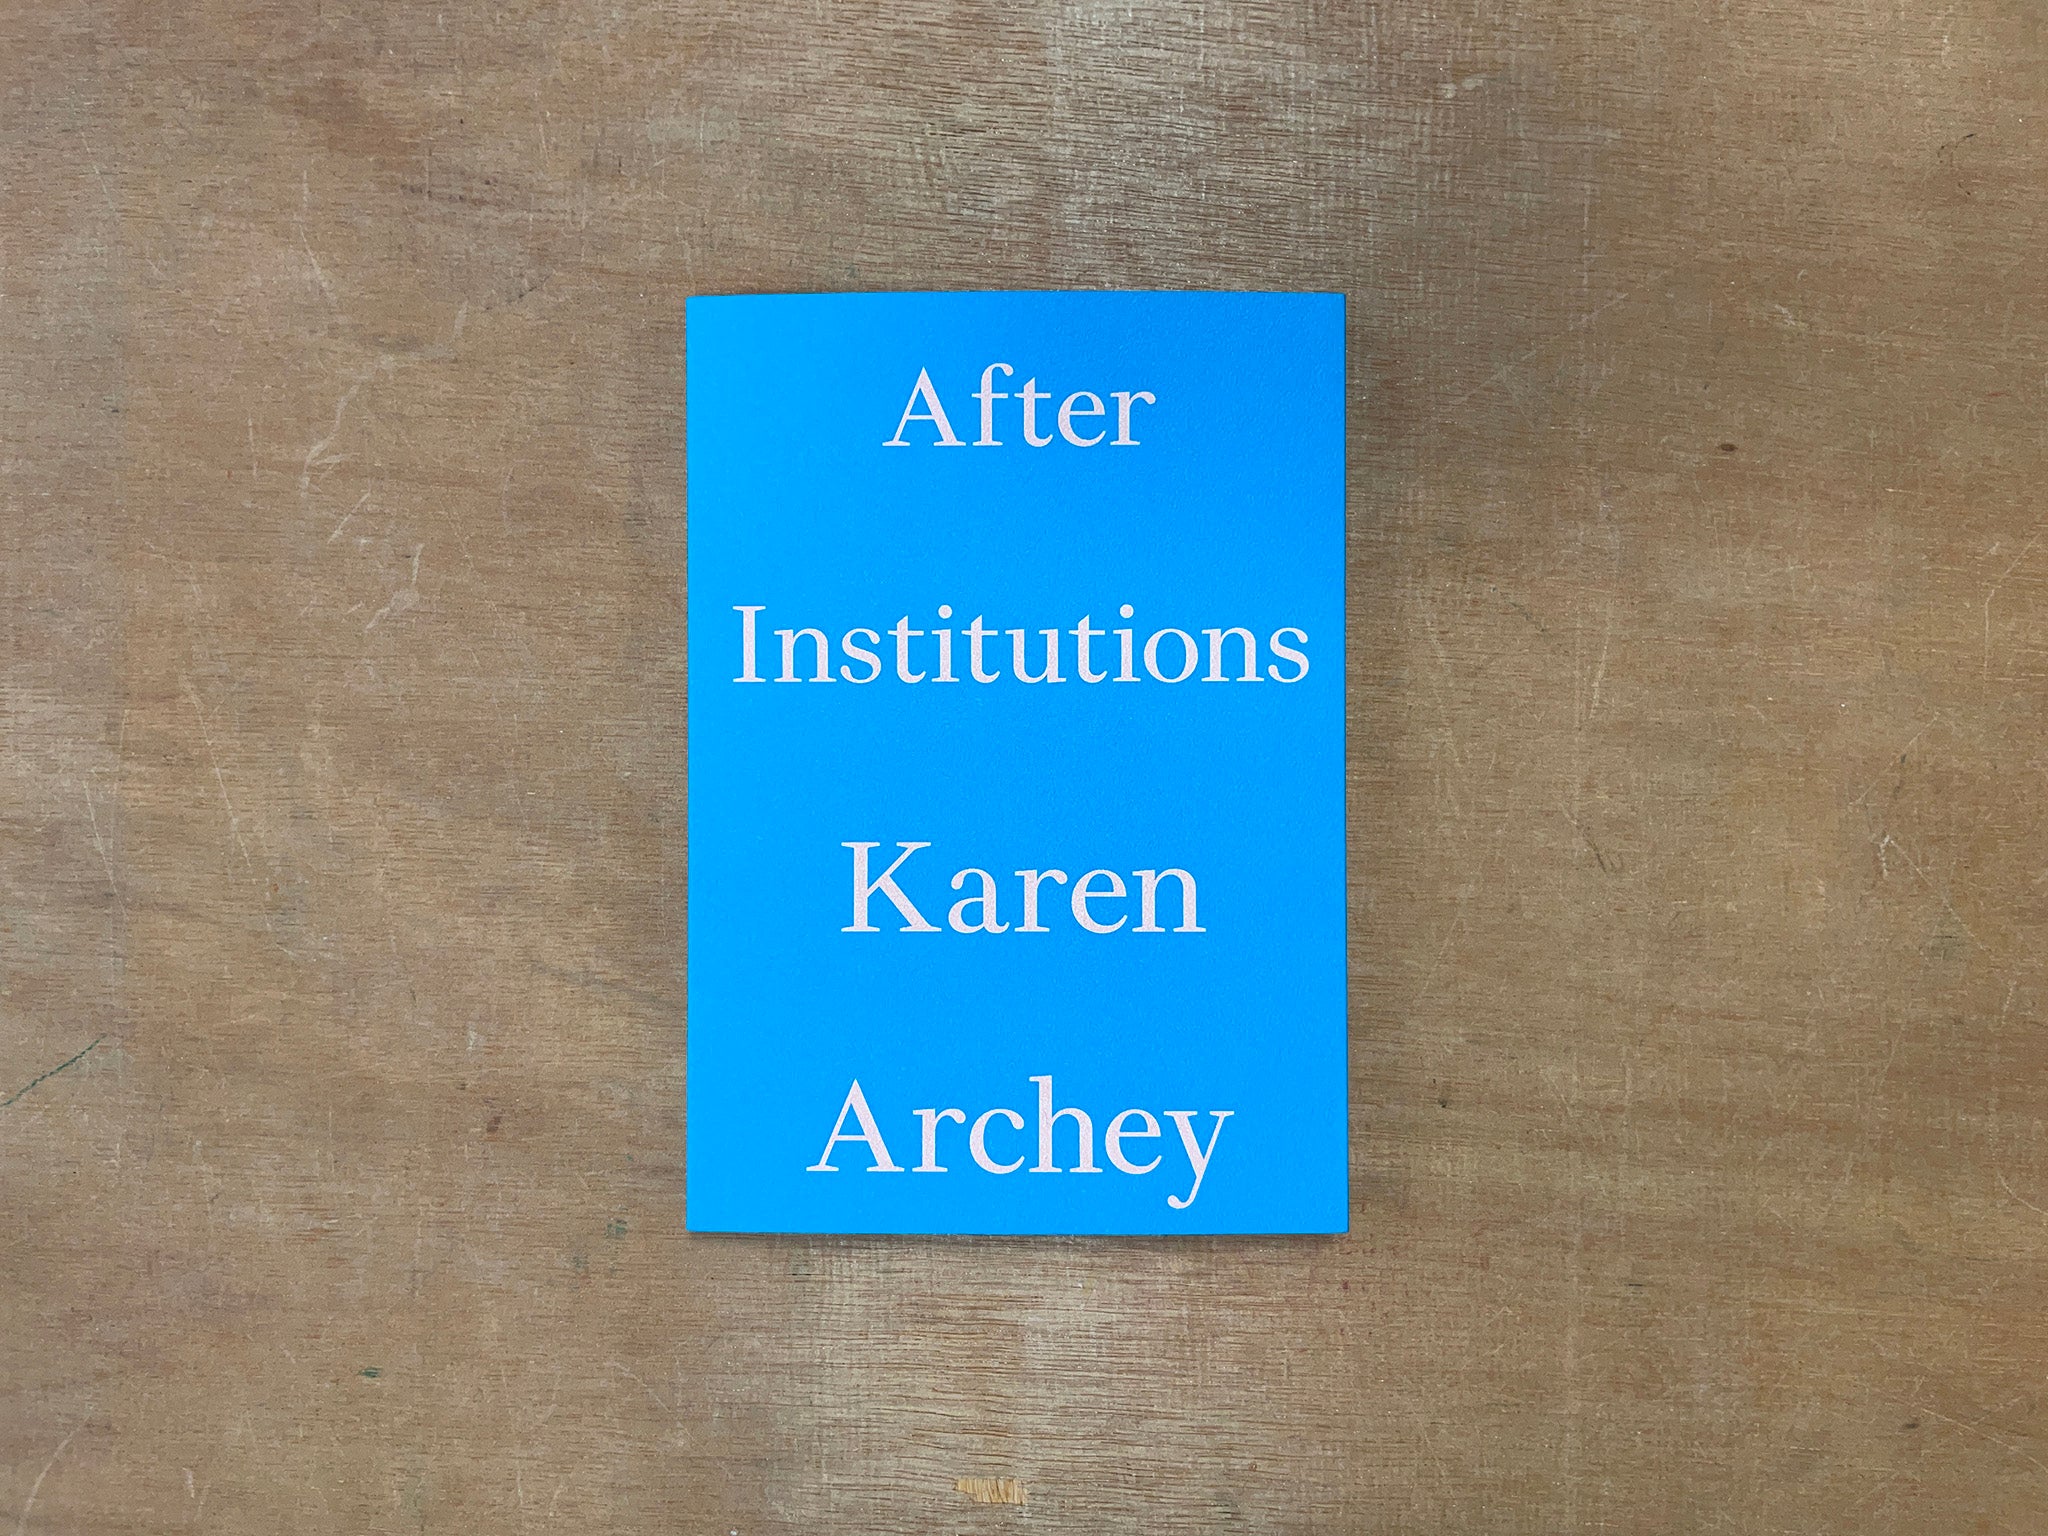 AFTER INSTITUTIONS by Karen Archey